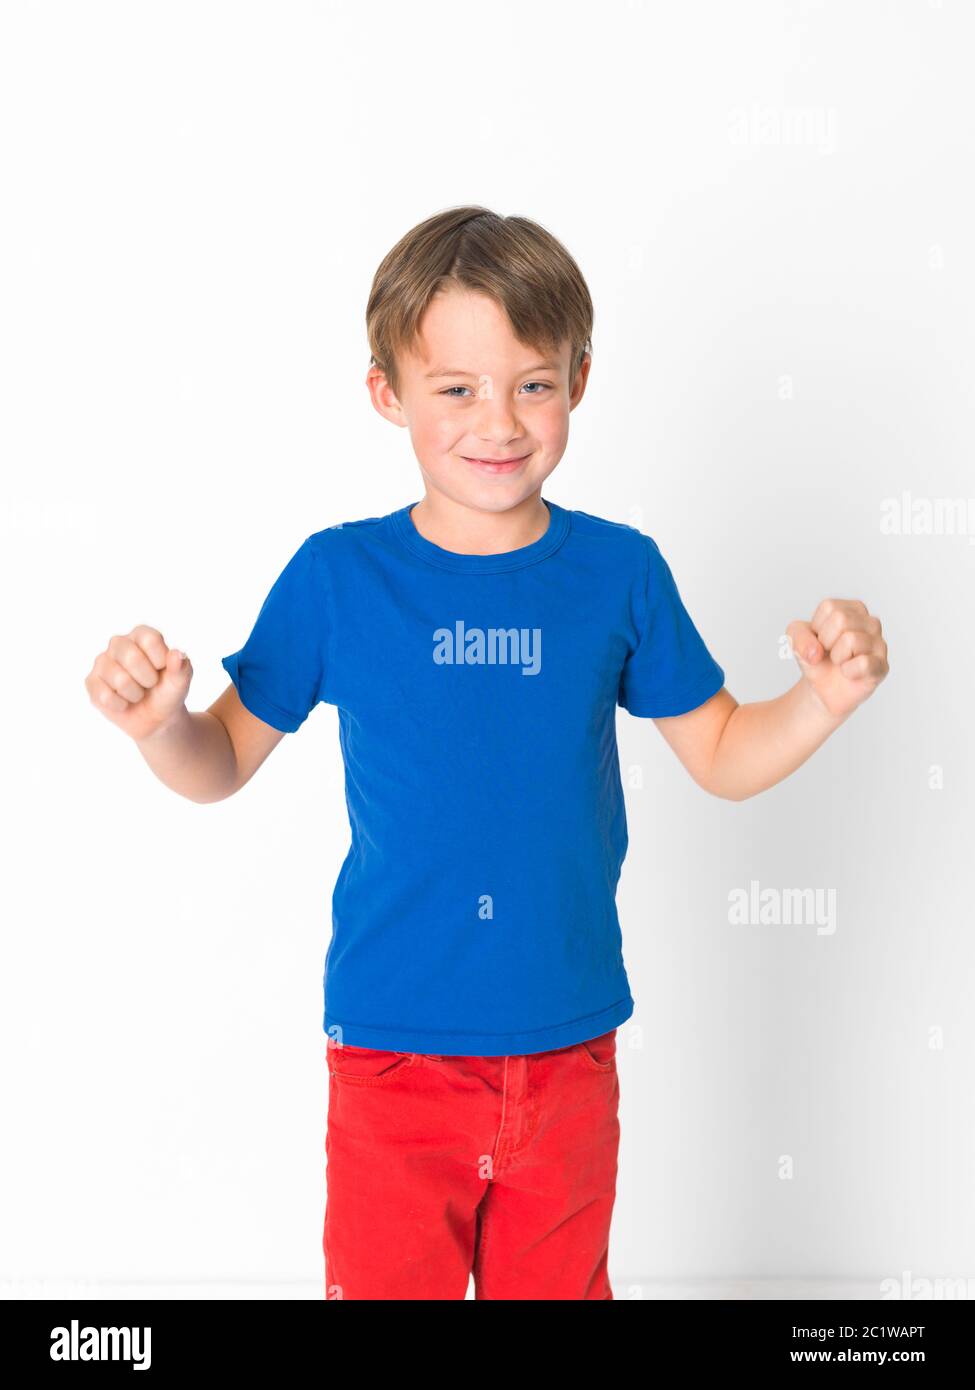 cool and cute six year old boy in red trousers and blue shirt is posing in front of white background Stock Photo